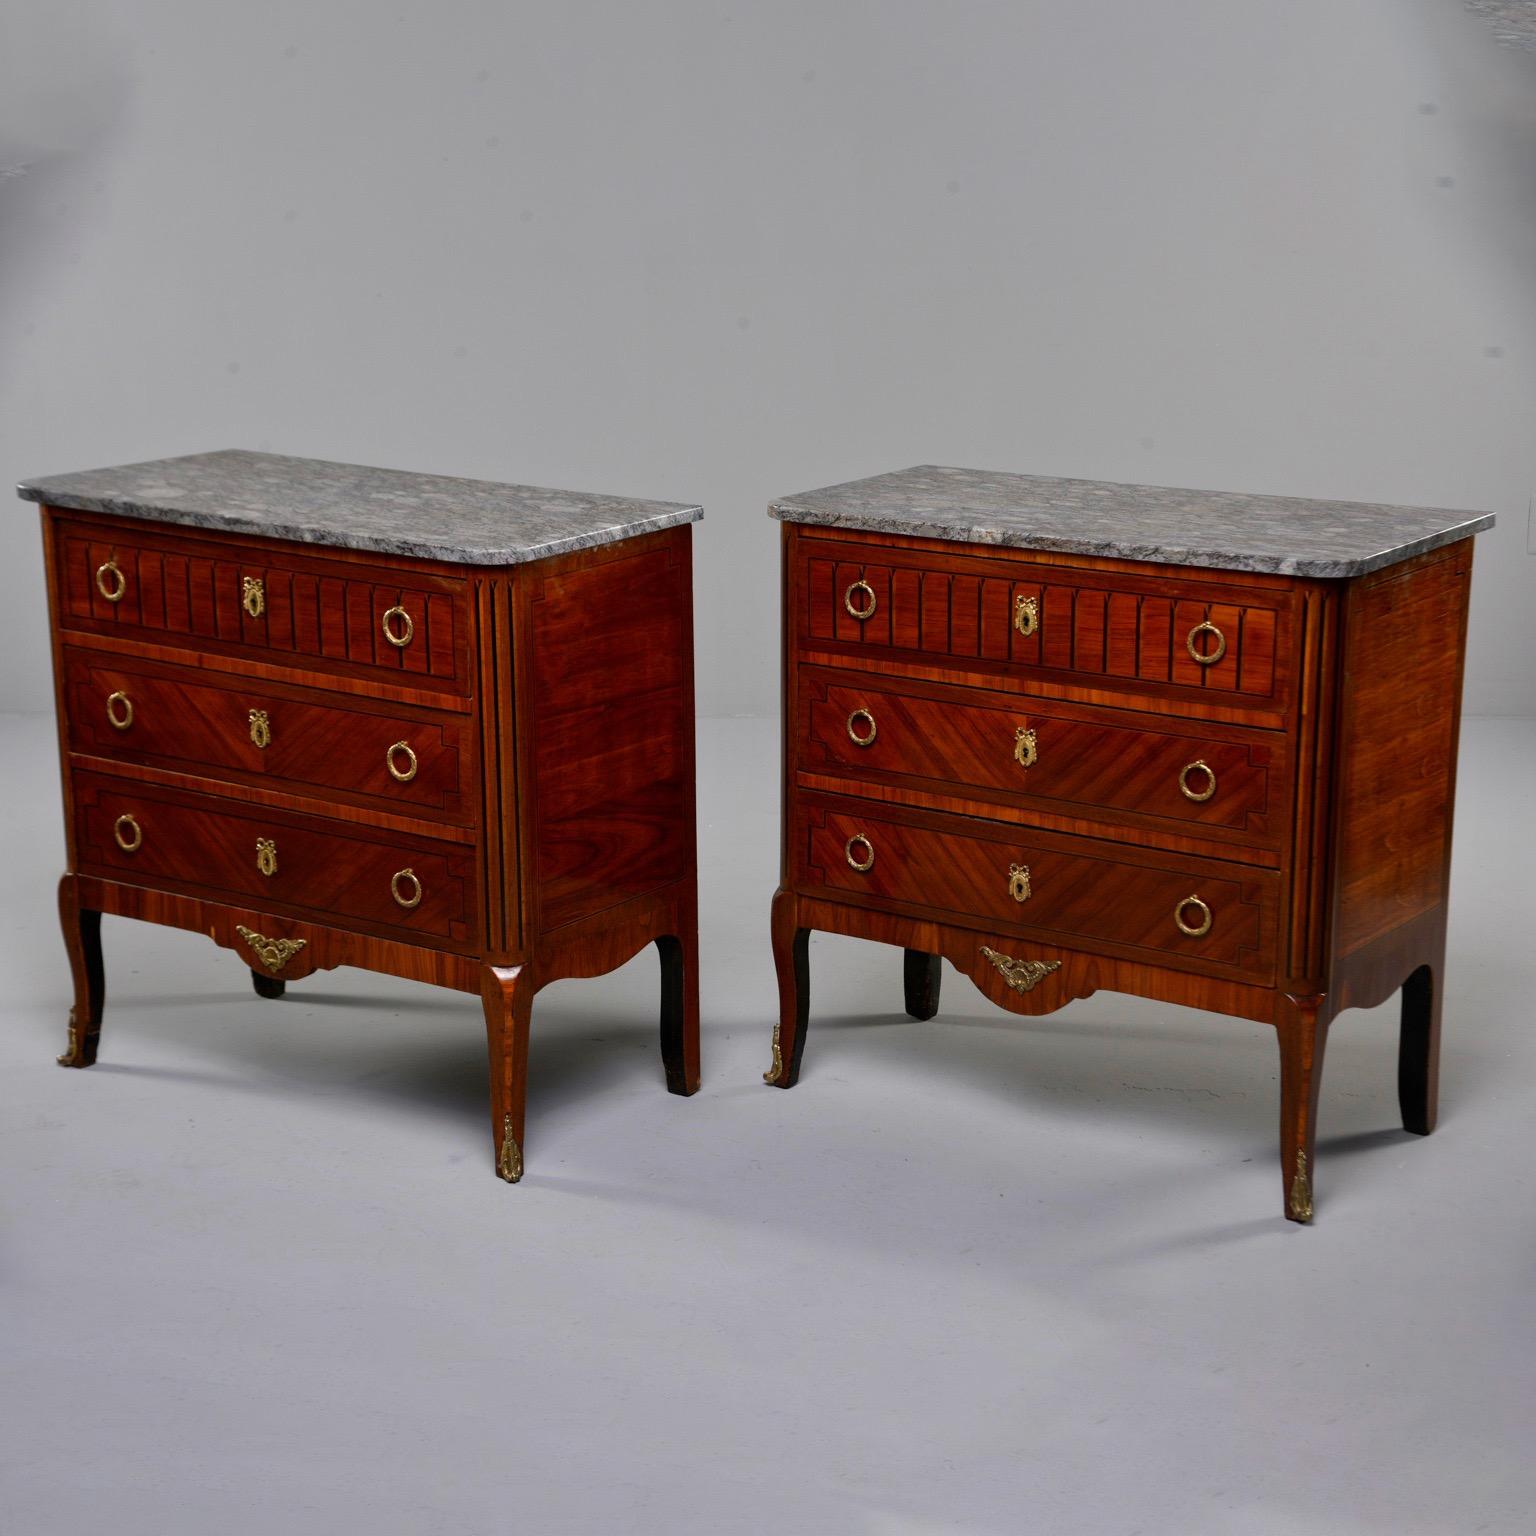 Found in Italy, this pair of French cabinets date from circa 1900. Each piece is mahogany with three functional drawers, wreath-style brass pull rings, ribbon-crested escutcheons, decorative brass mounts on the apron and feet, and dark gray marble